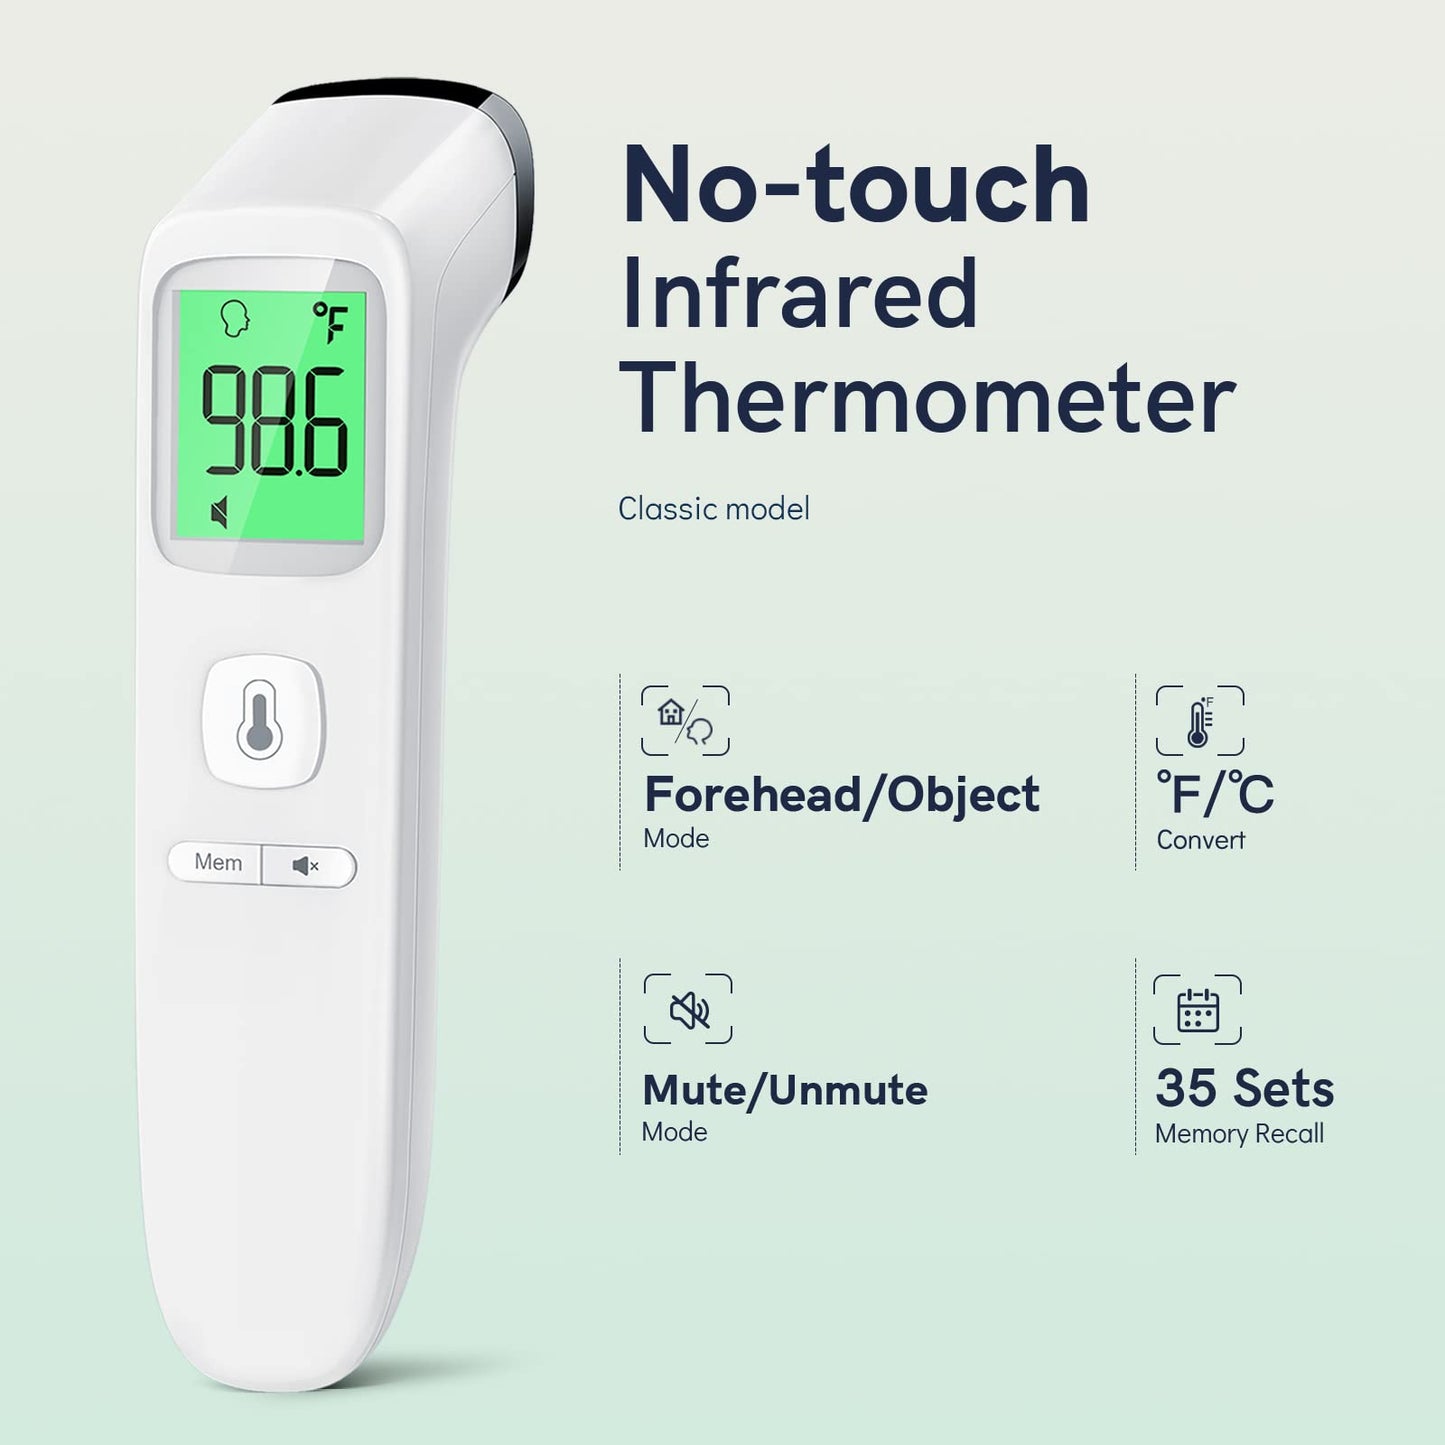 No-Touch Thermometer for Adults and Kids, FSA/HSA Eligible, Fast Accurate Digital Thermometer with Fever Alarm & Silent Mode, Easy-to-use for Babies, Kids, & Elderly